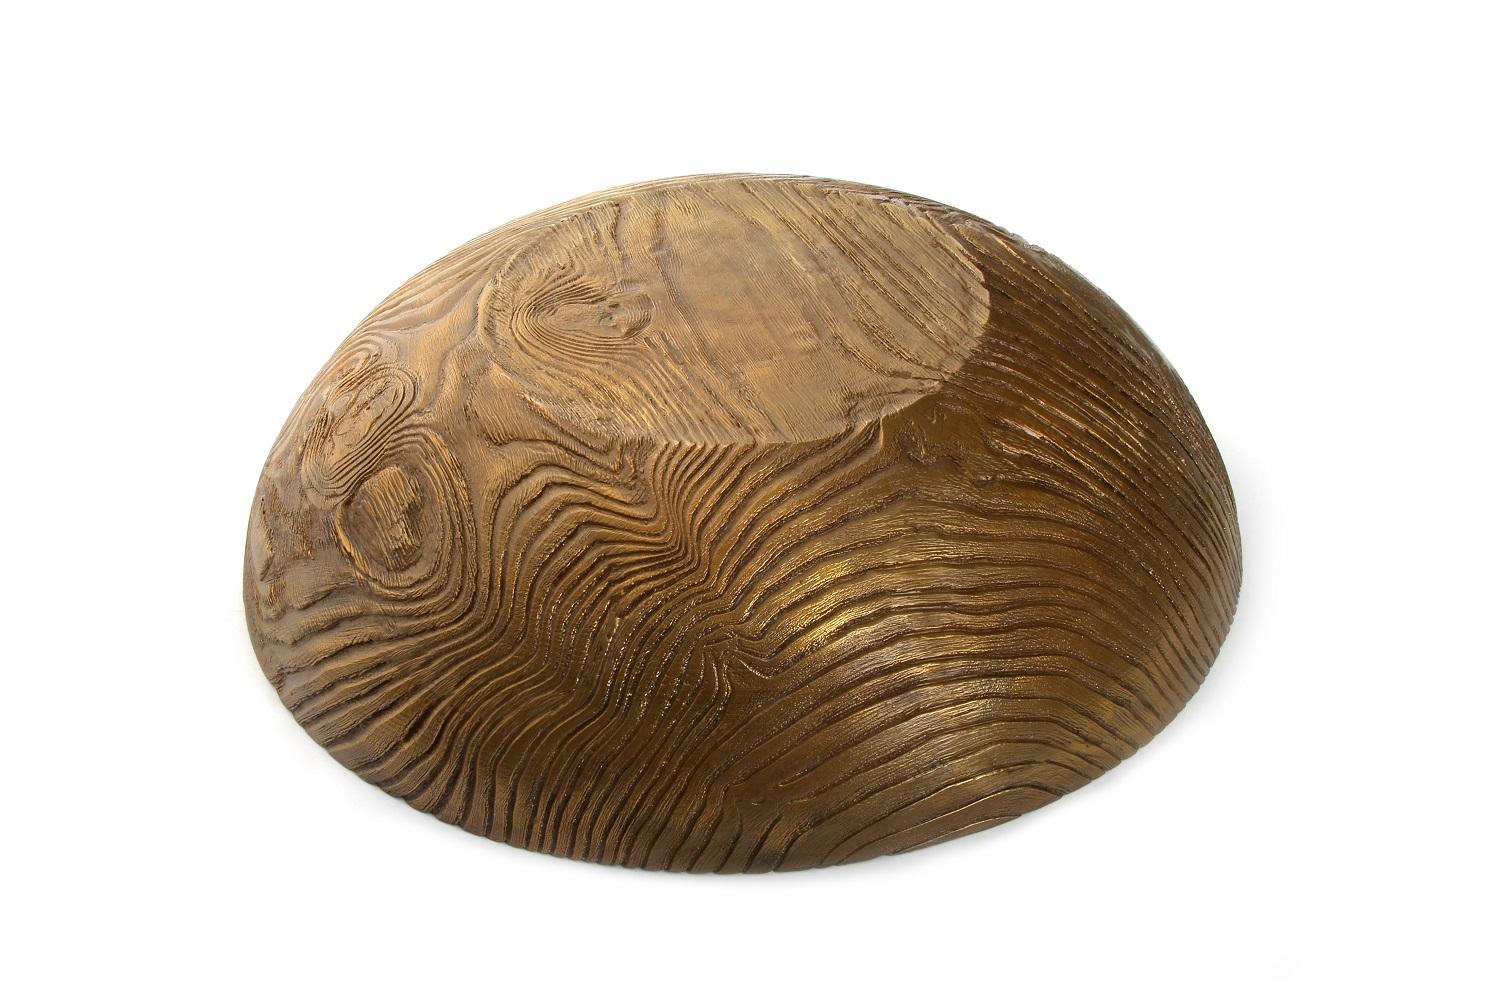 Solid Bronze Everest Bowl / Vessel with Wooden Texture and Golden Bronze Patina For Sale 1